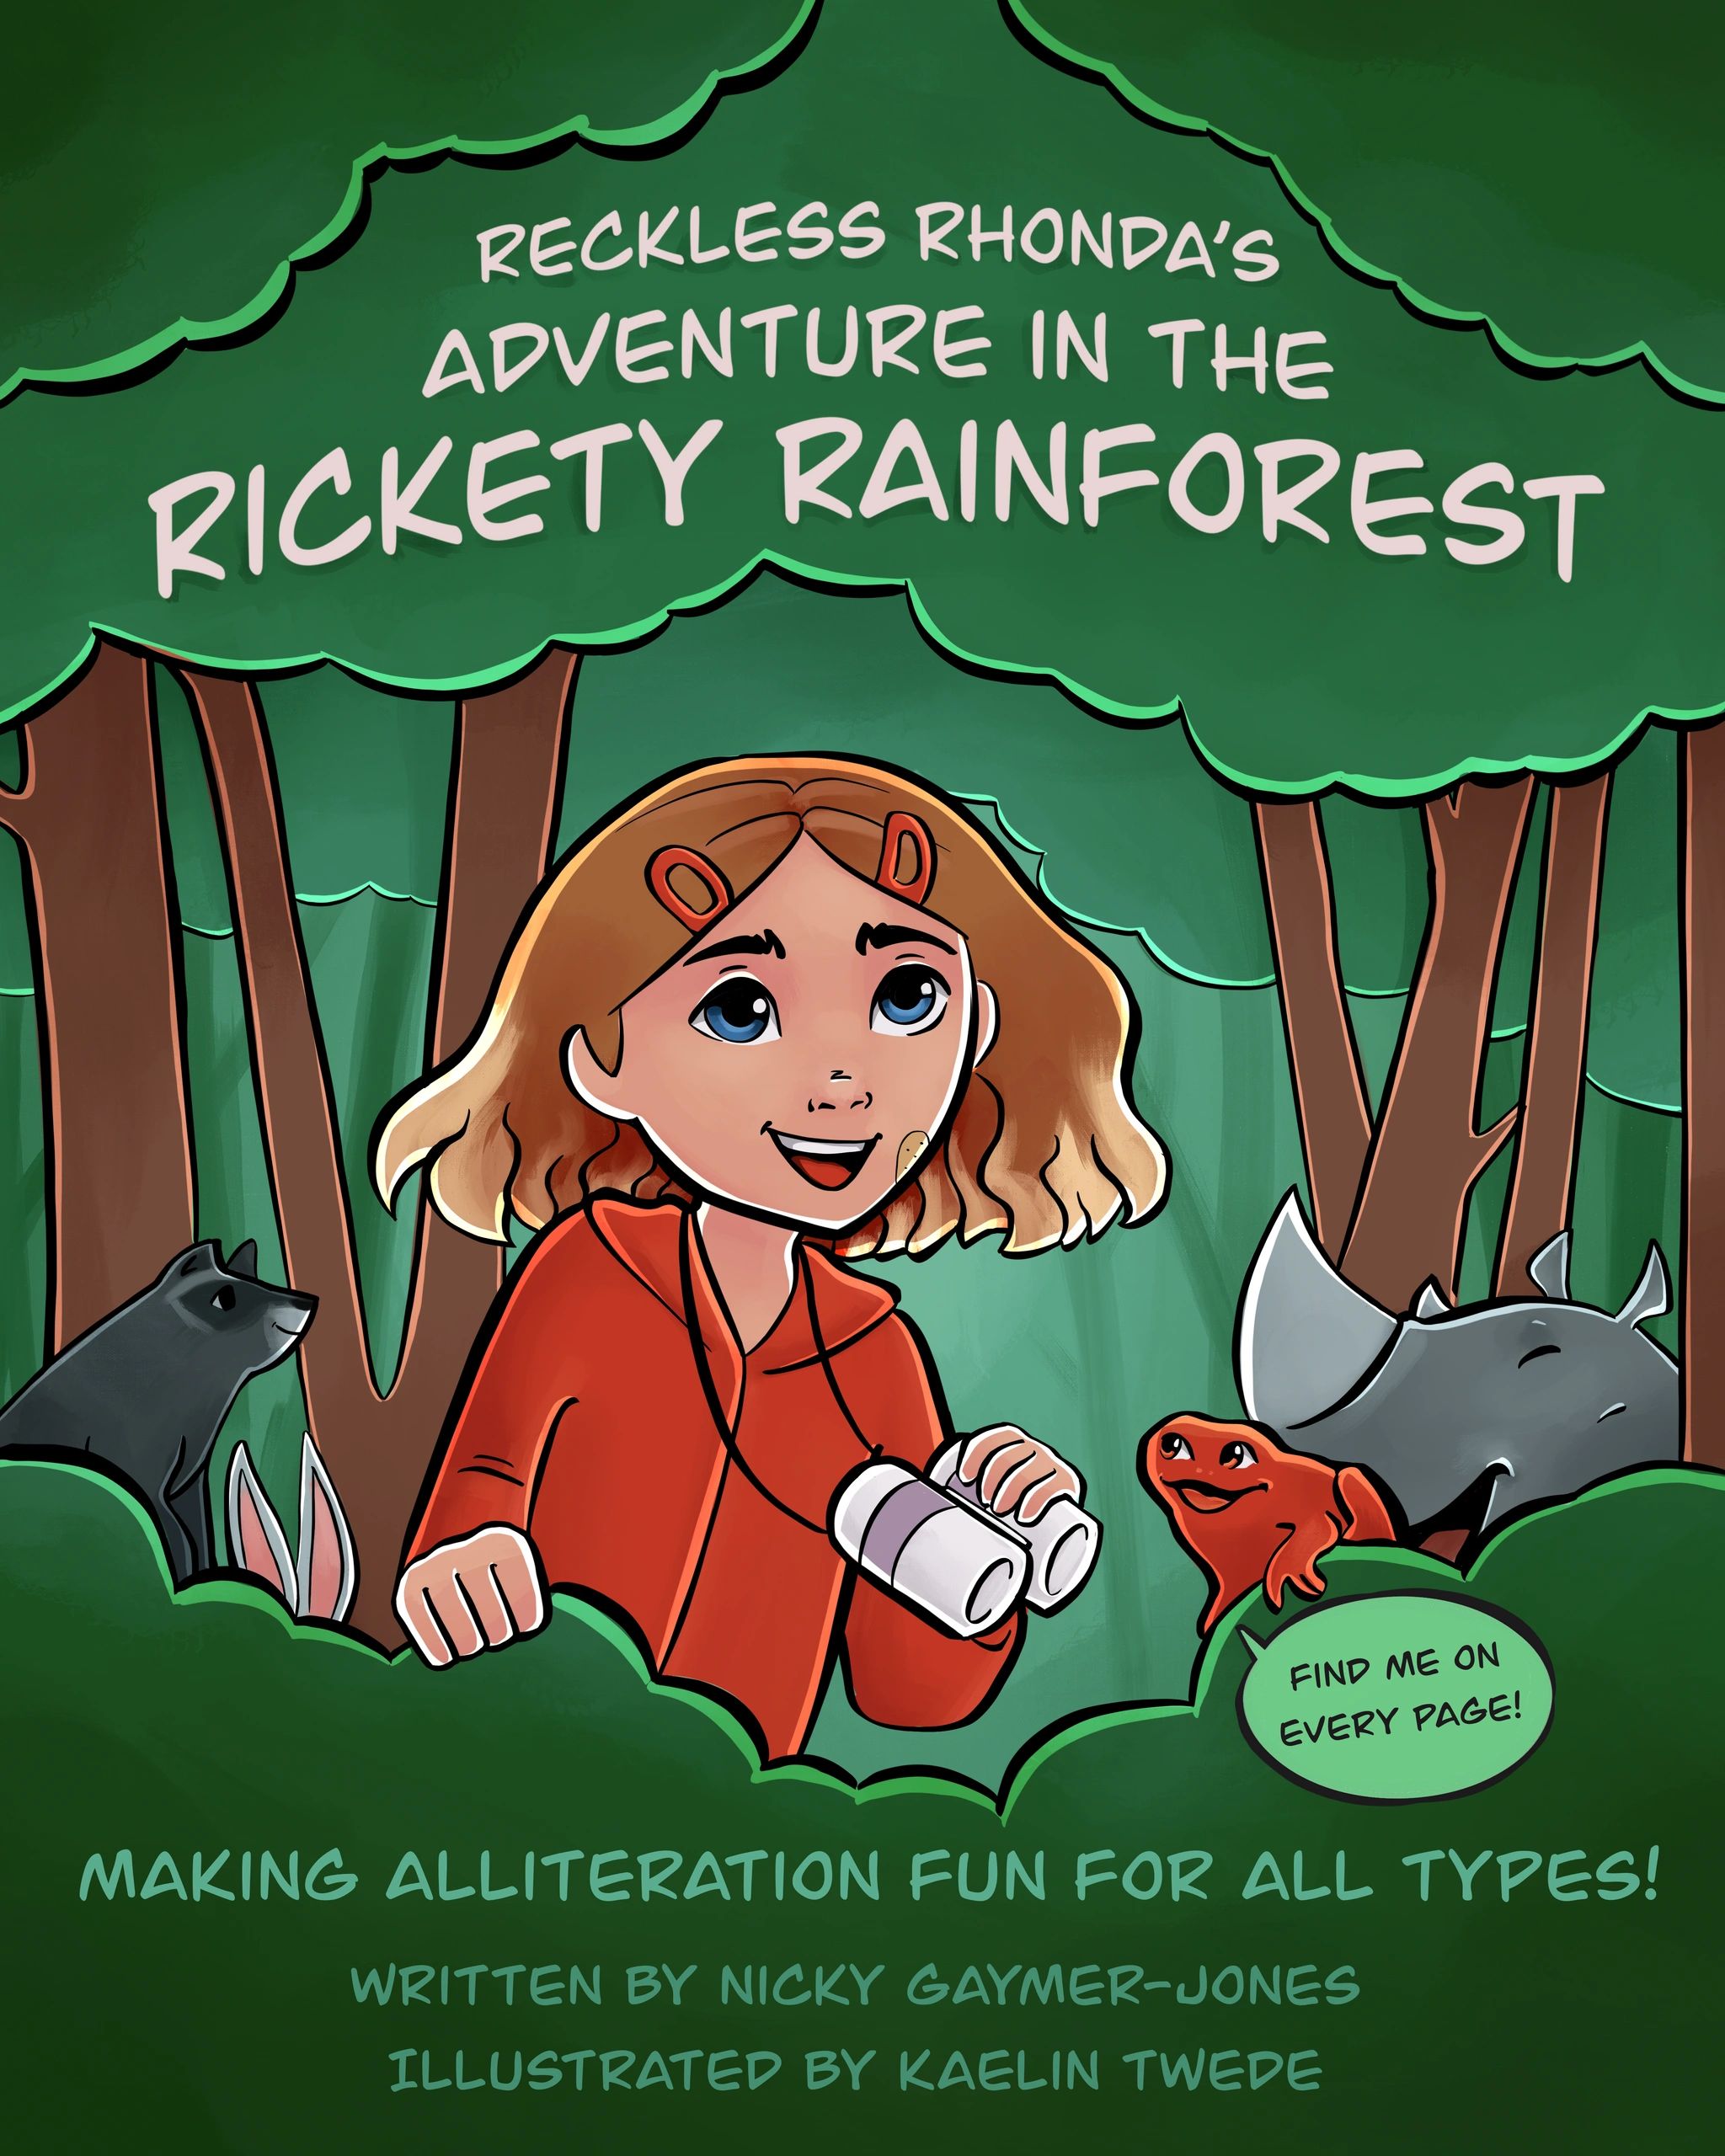 RECKLESS RHONDA'S ADVENTURE IN THE RICKETY RAINFOREST COVER

children's books with alliteration